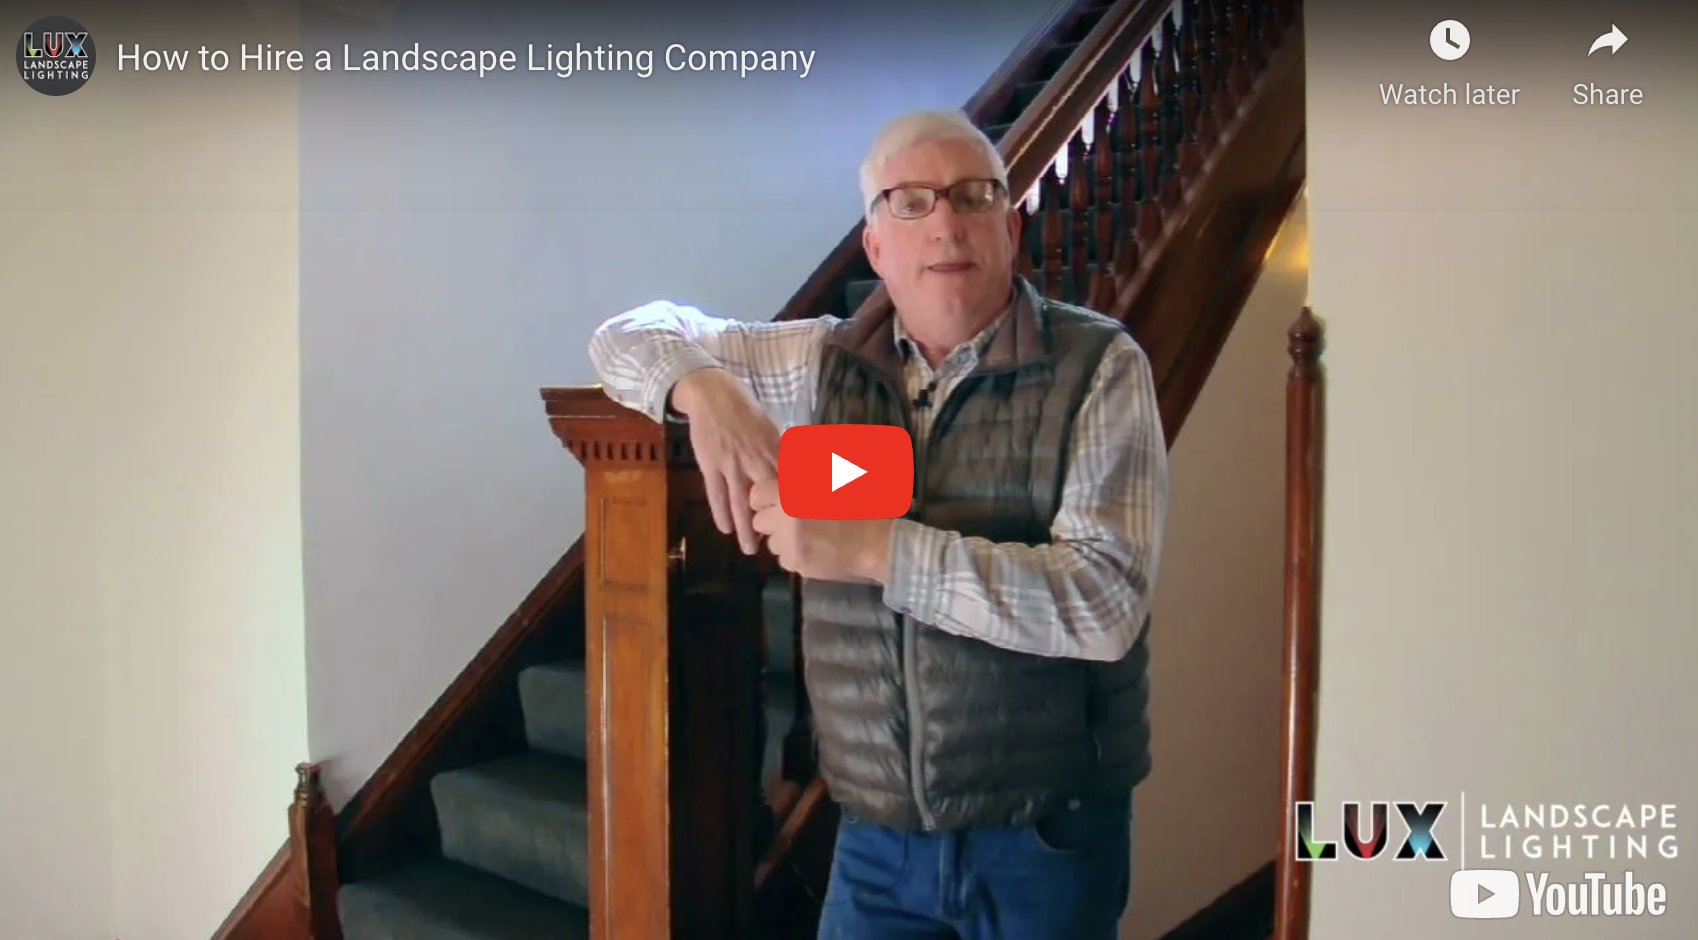 How to Hire a Landscape Lighting Company